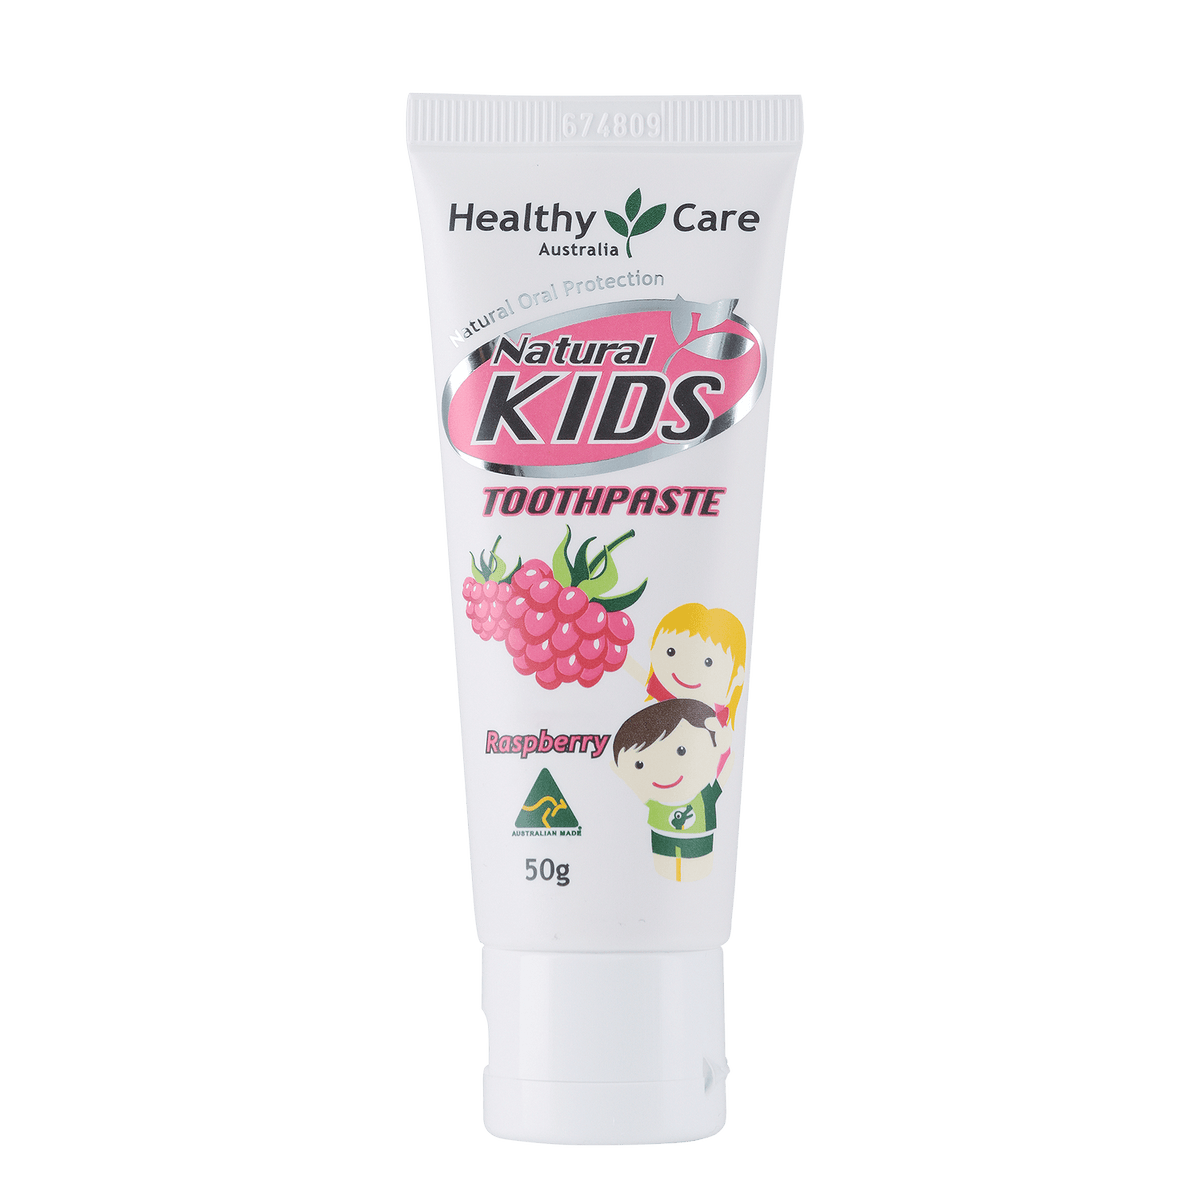 Natural Kids Toothpaste Raspberry Flavour 50g-Toothpaste-Healthy Care Australia